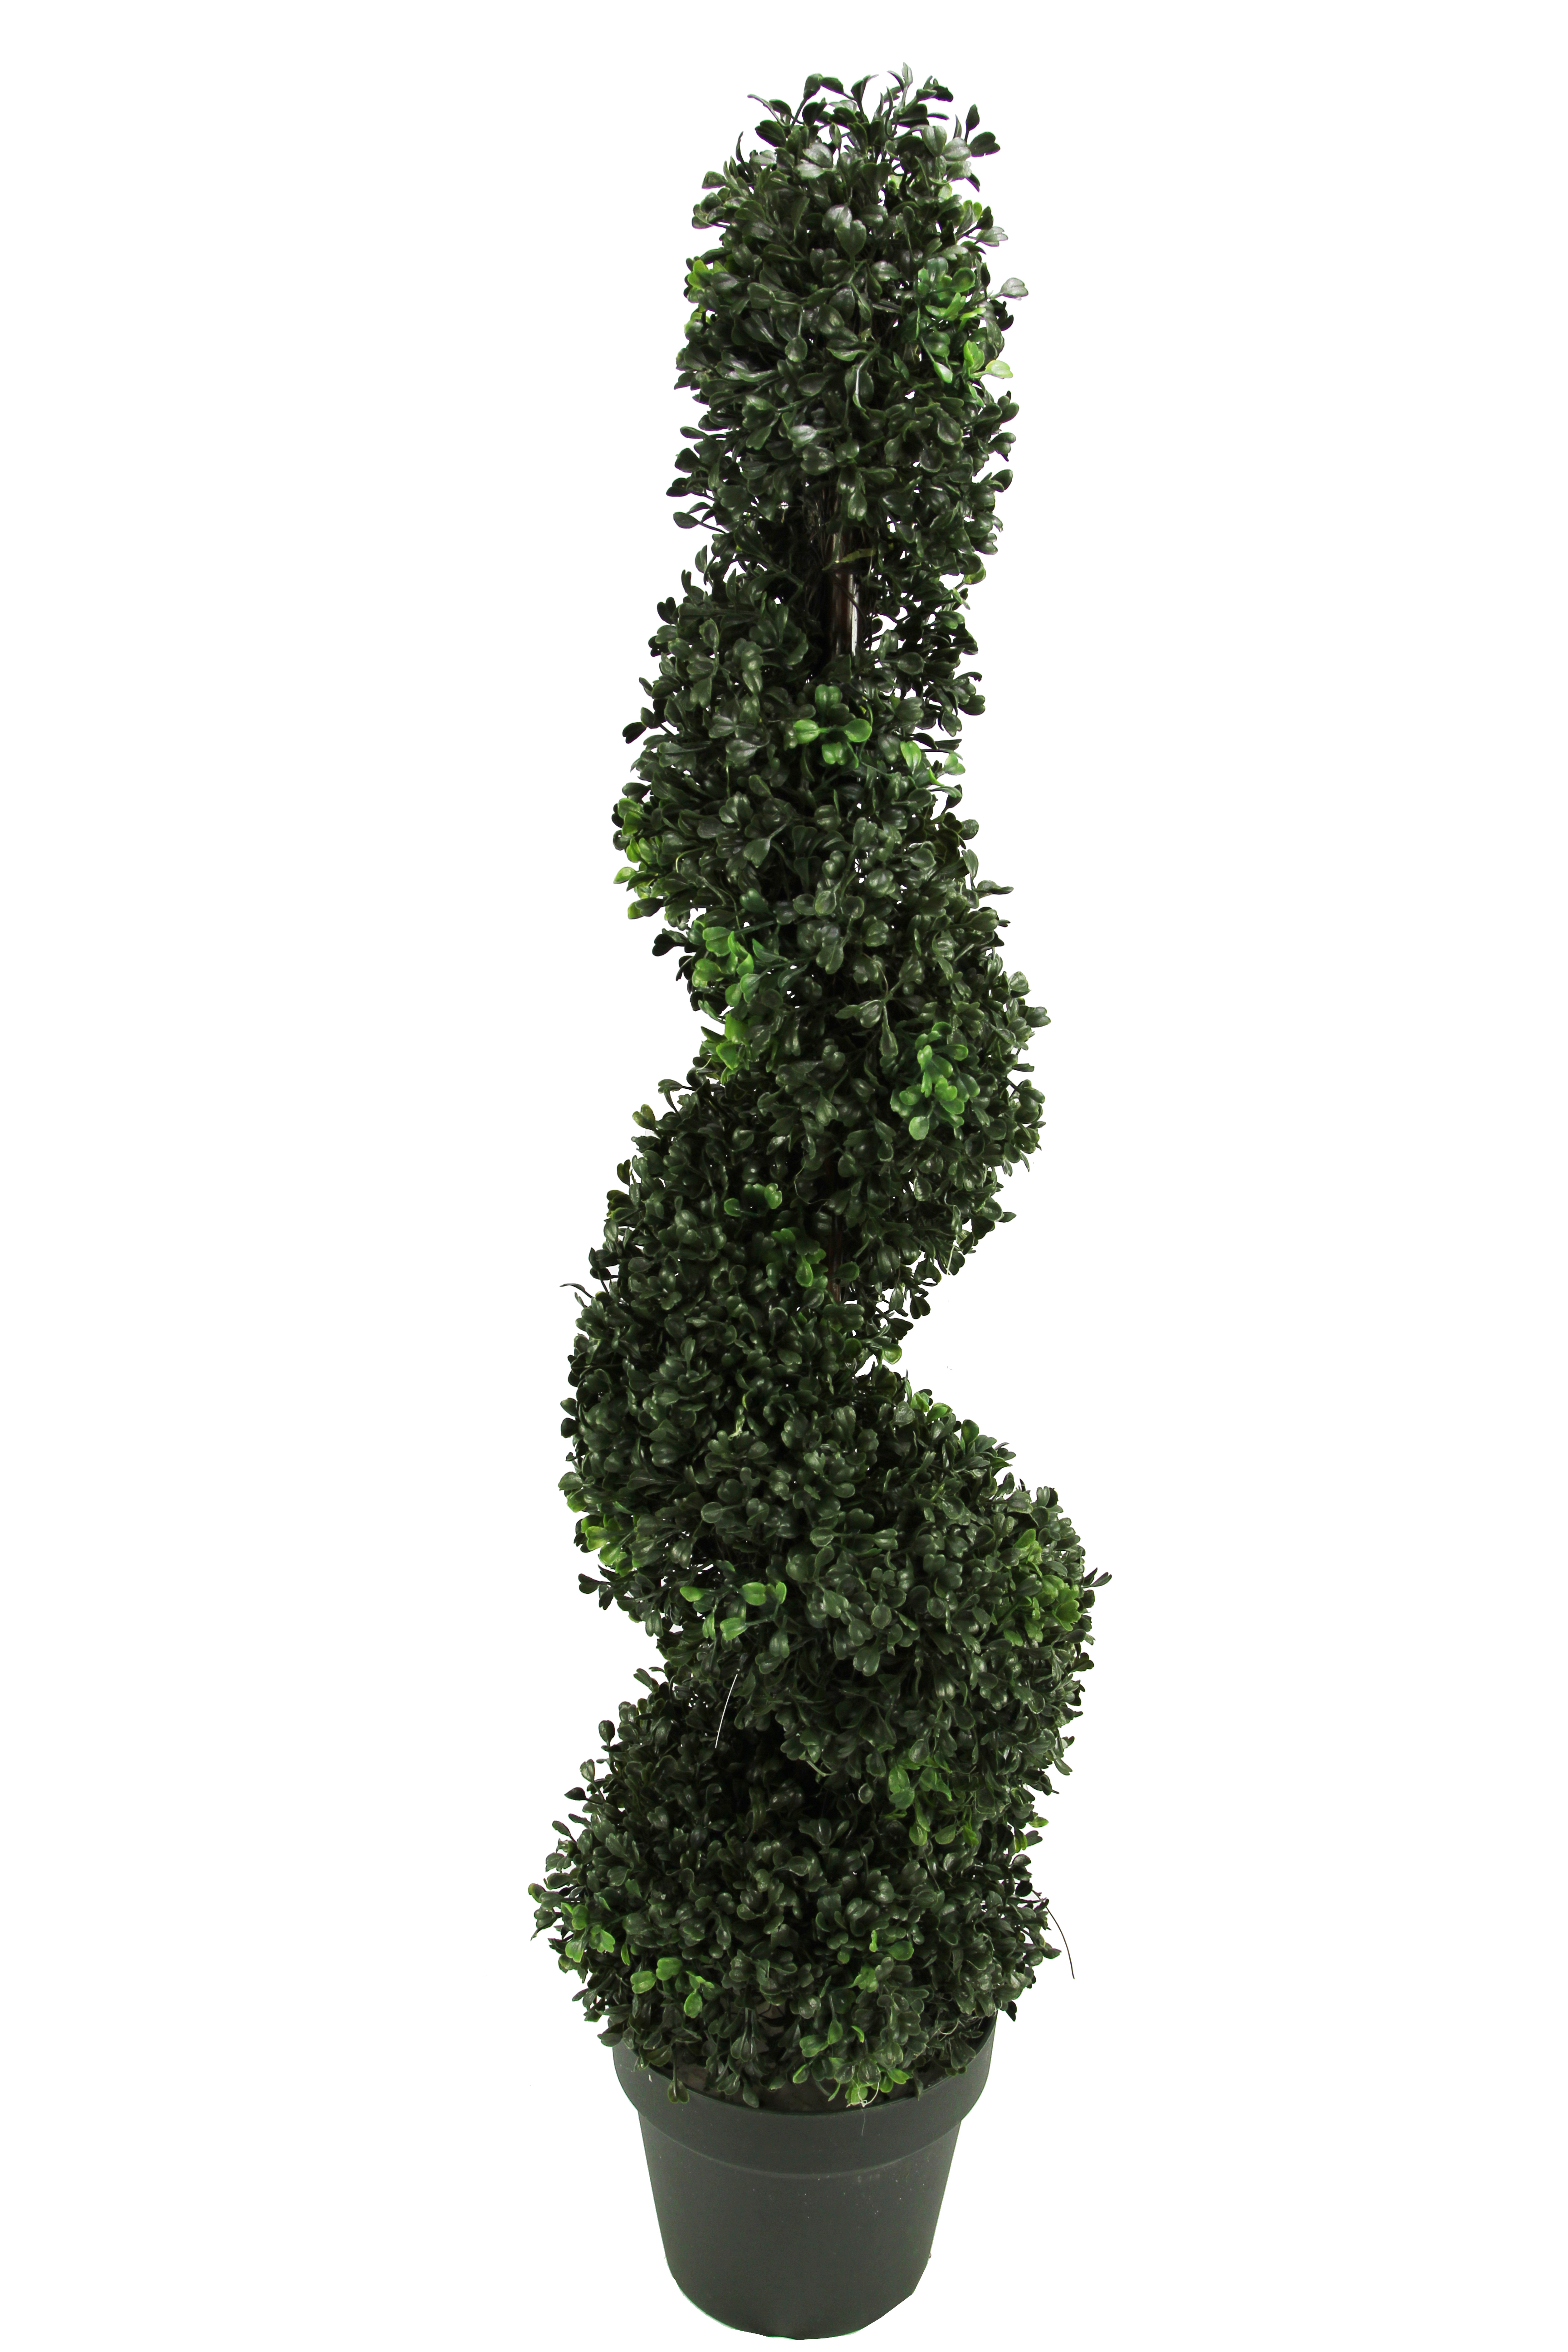 Picture of Admired by Nature GTR4633-NATURAL Artificial Boxwood Leave Spiral Topiary Plant in Plastic Pot, Green - 3 ft.